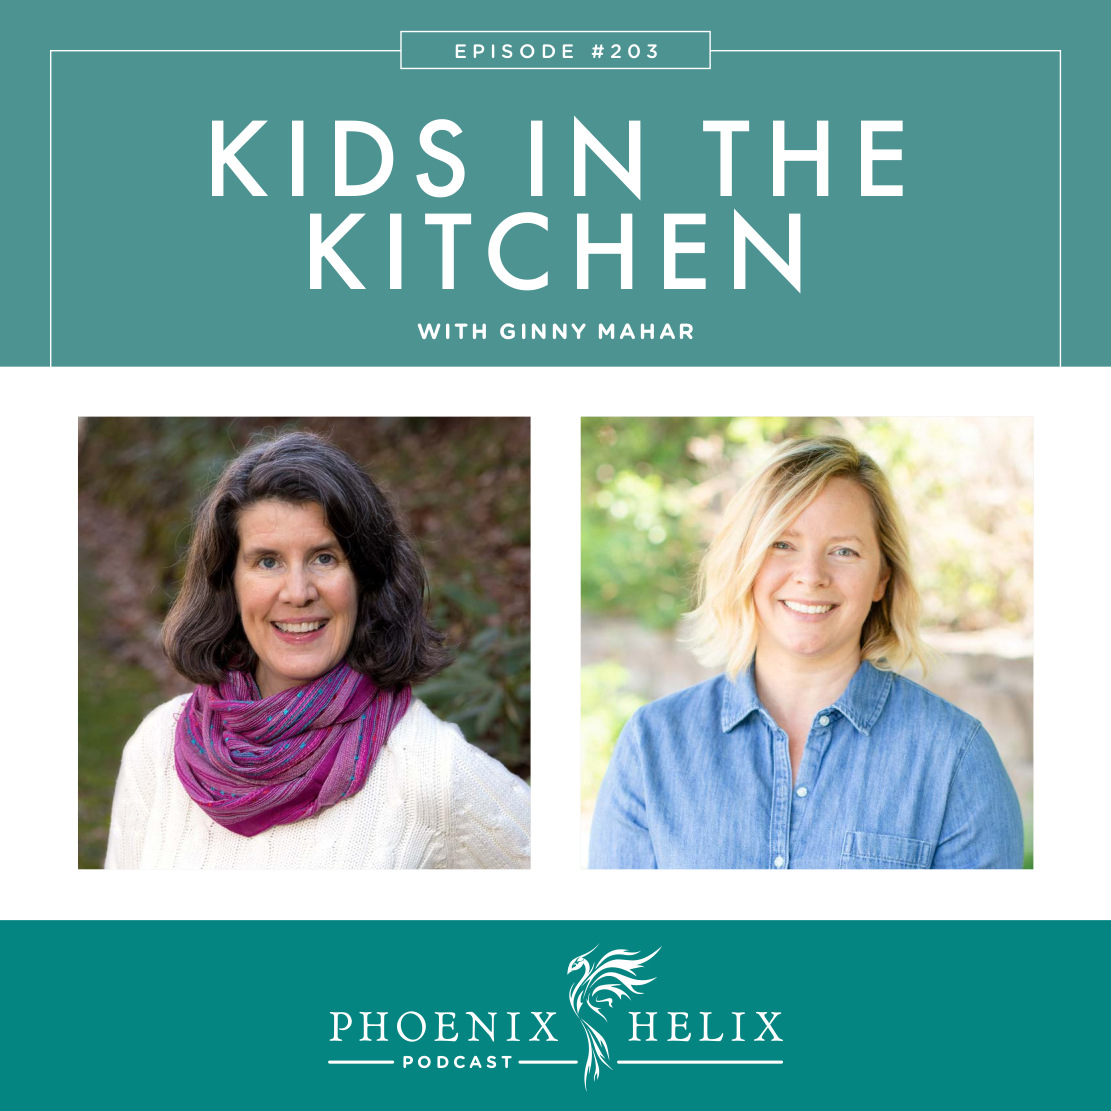 Kids in the Kitchen with Ginny Mahar | Phoenix Helix Podcast